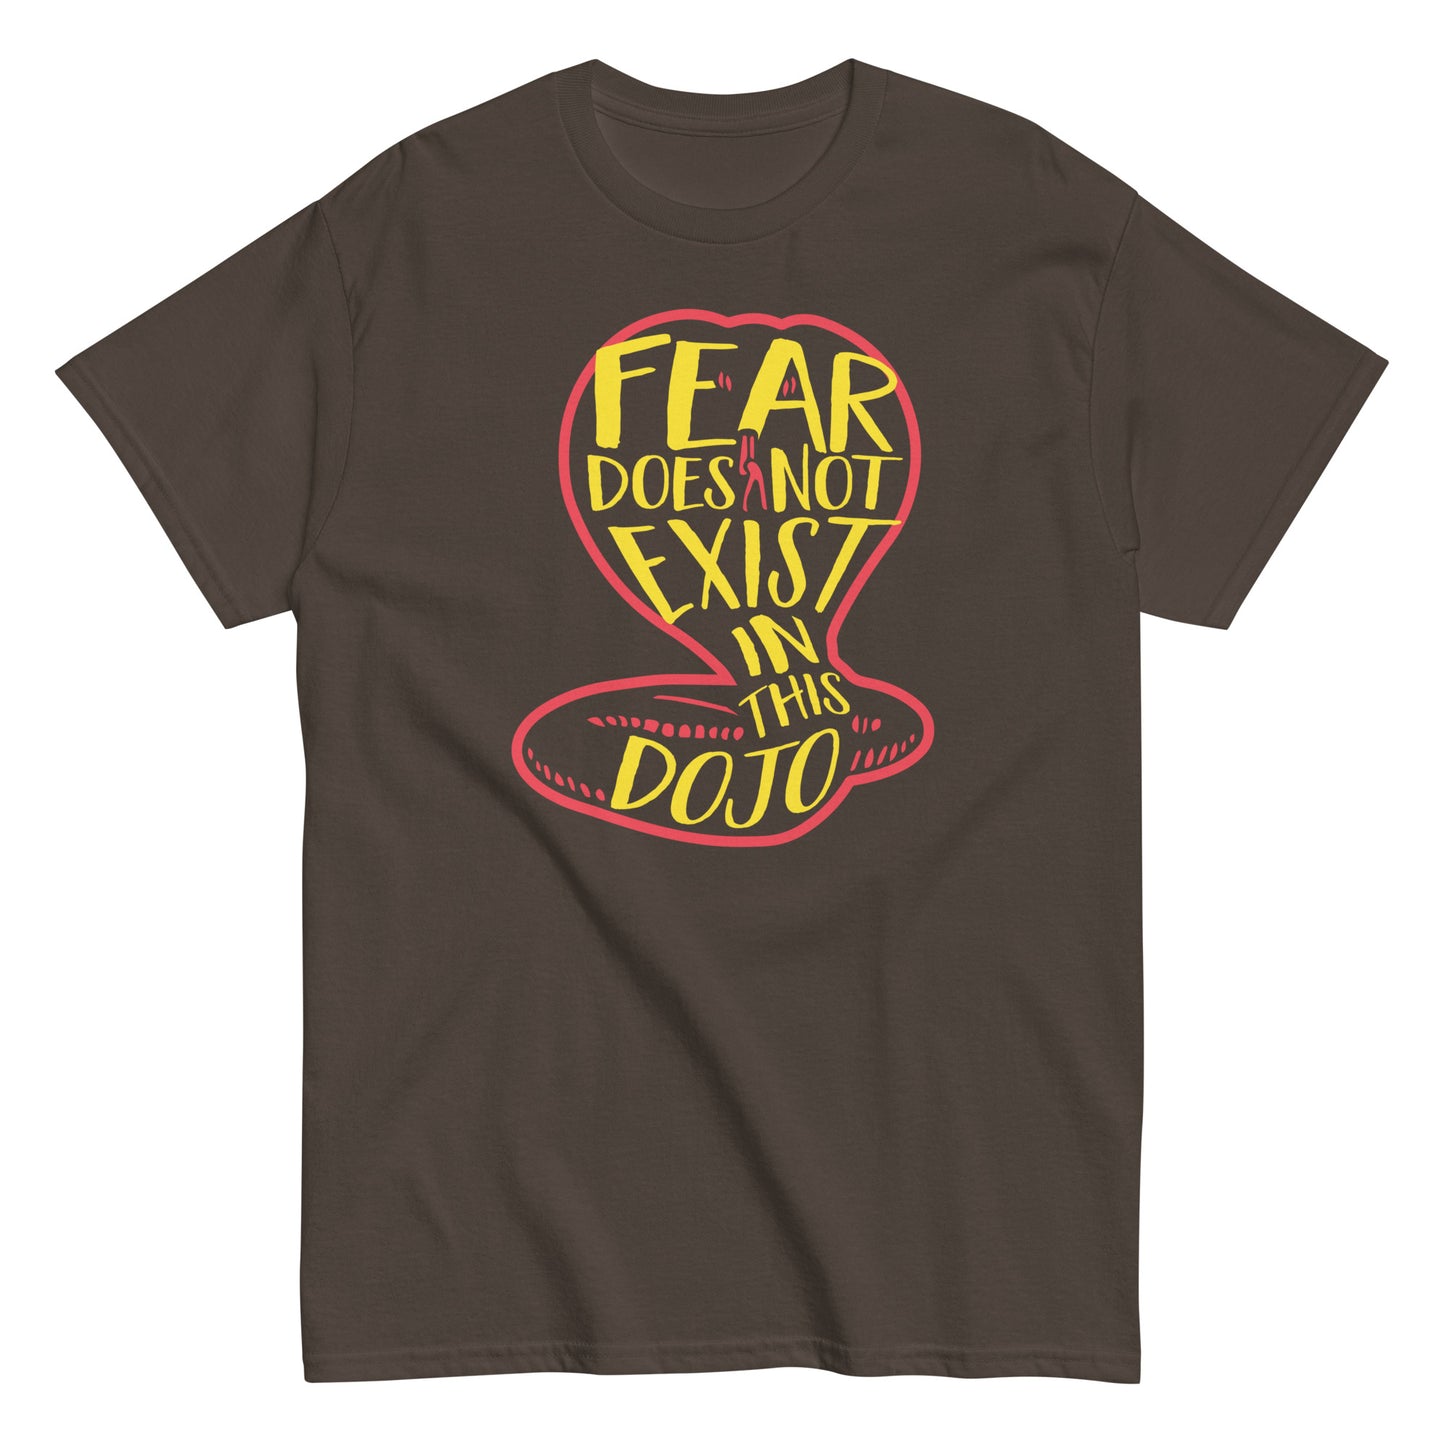 Fear Does Not Exist In This Dojo Men's Classic Tee